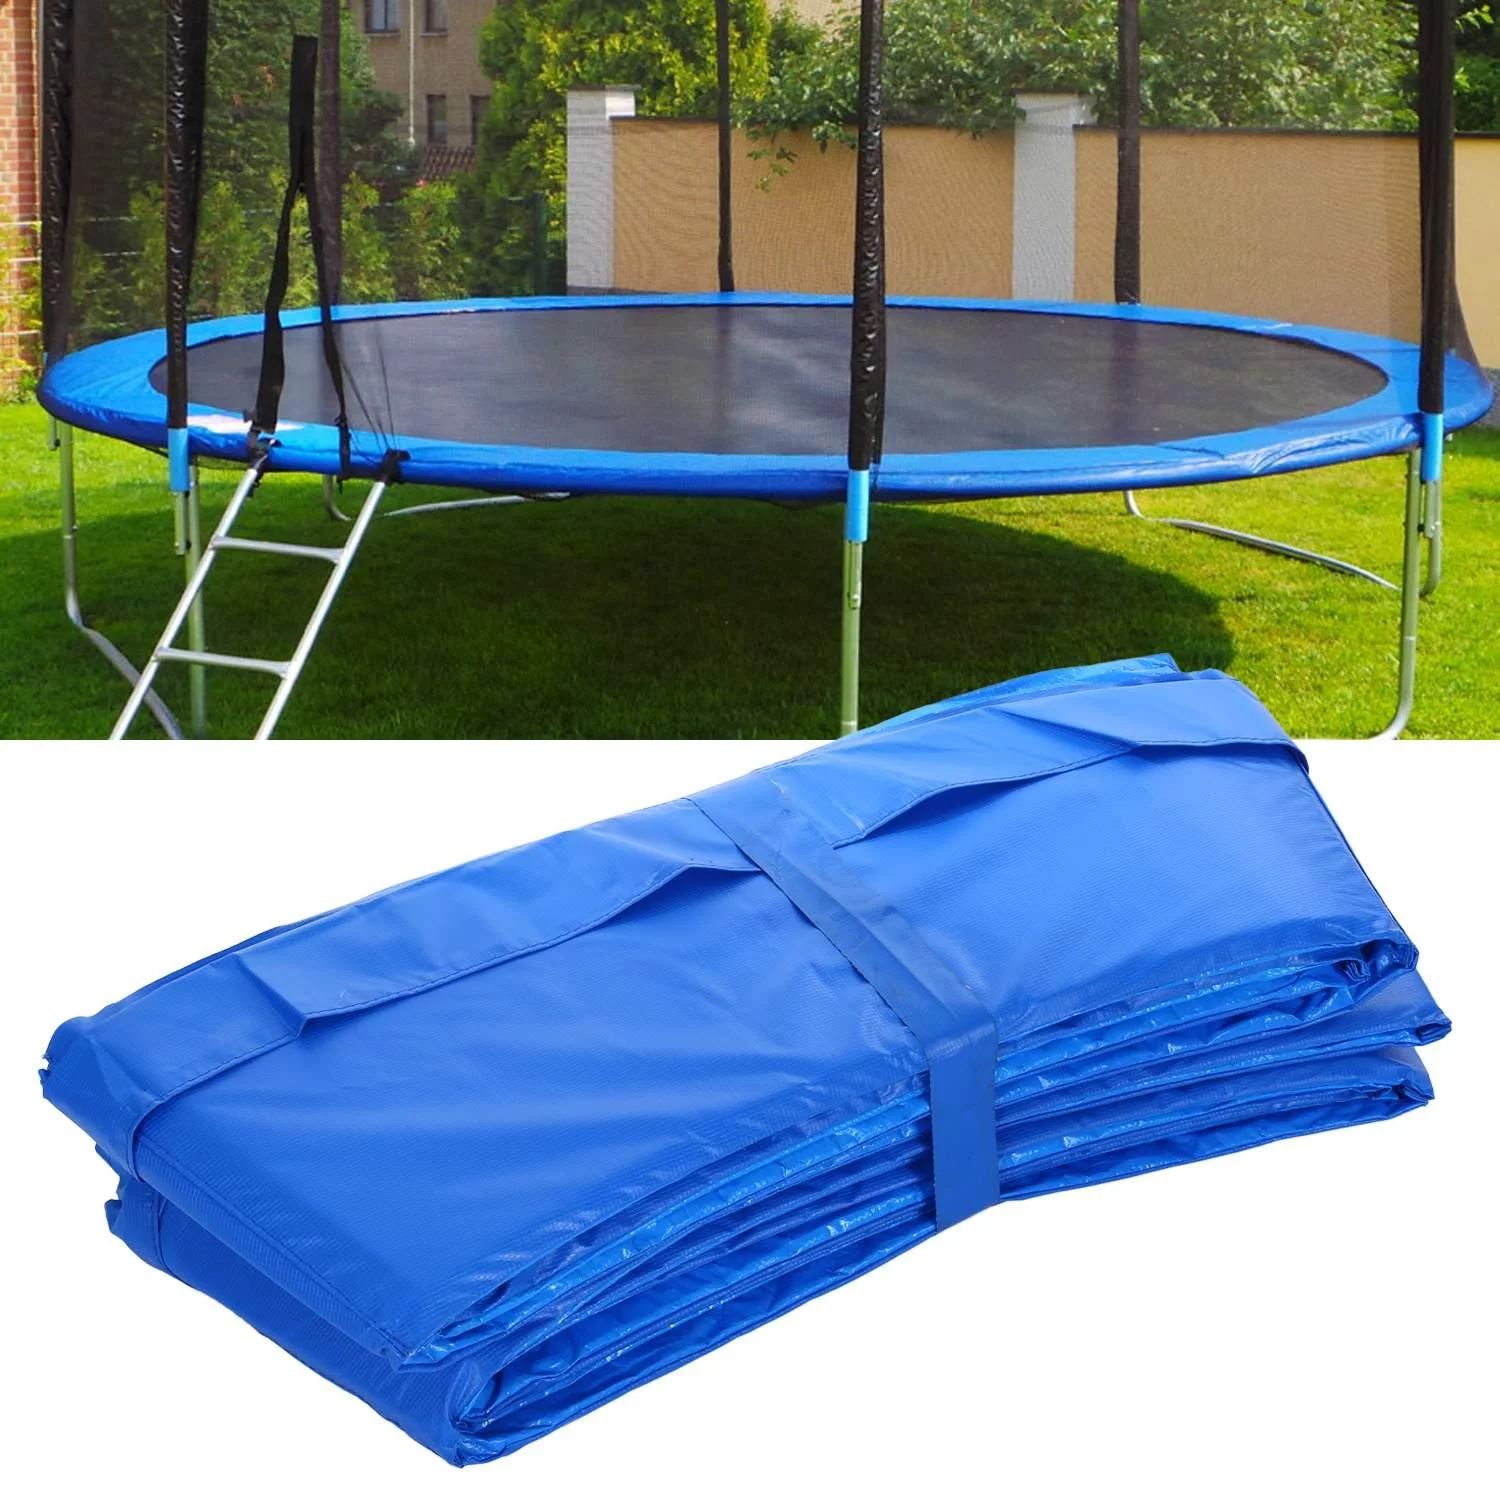 How To Measure For A Trampoline Pad | Storables